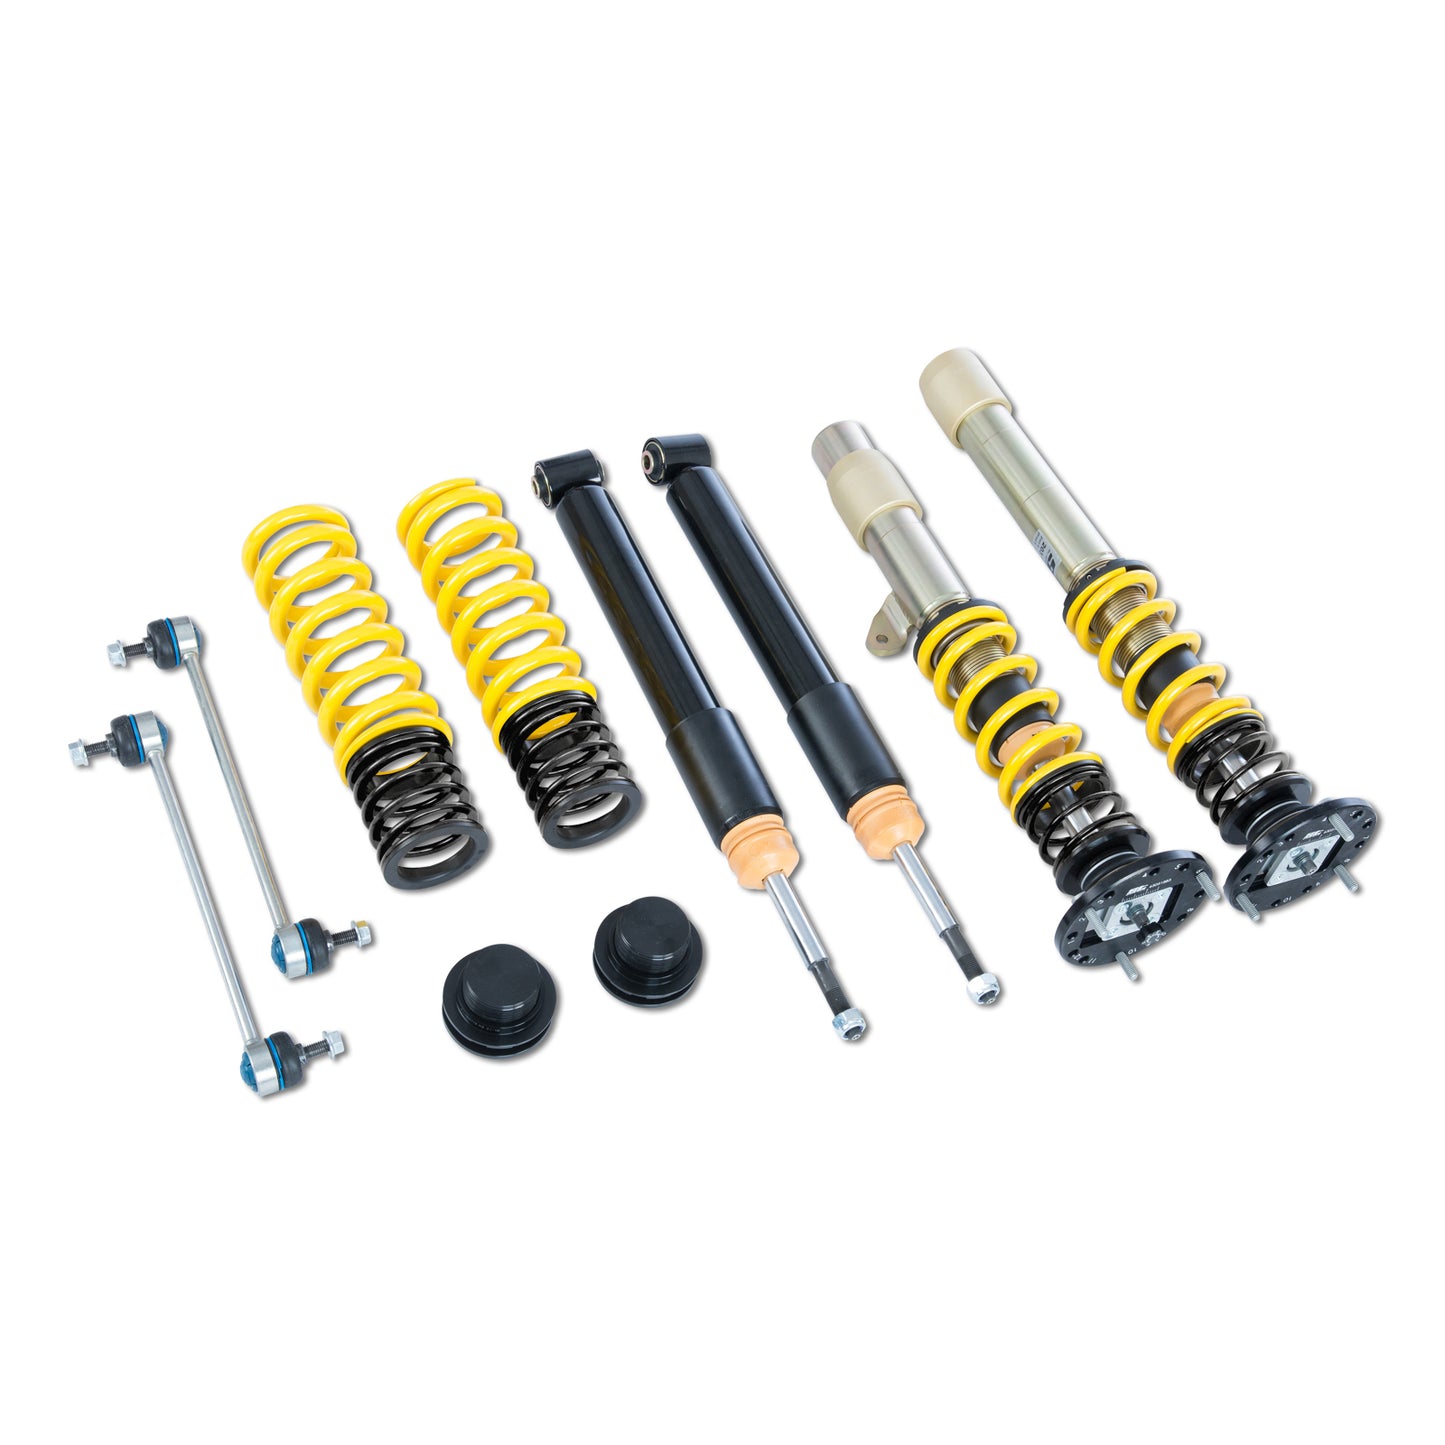 ST Suspensions 18220857 ST XTA Coilover Kit - BMW E9X M3 with Electronic Damper Control (EDC)